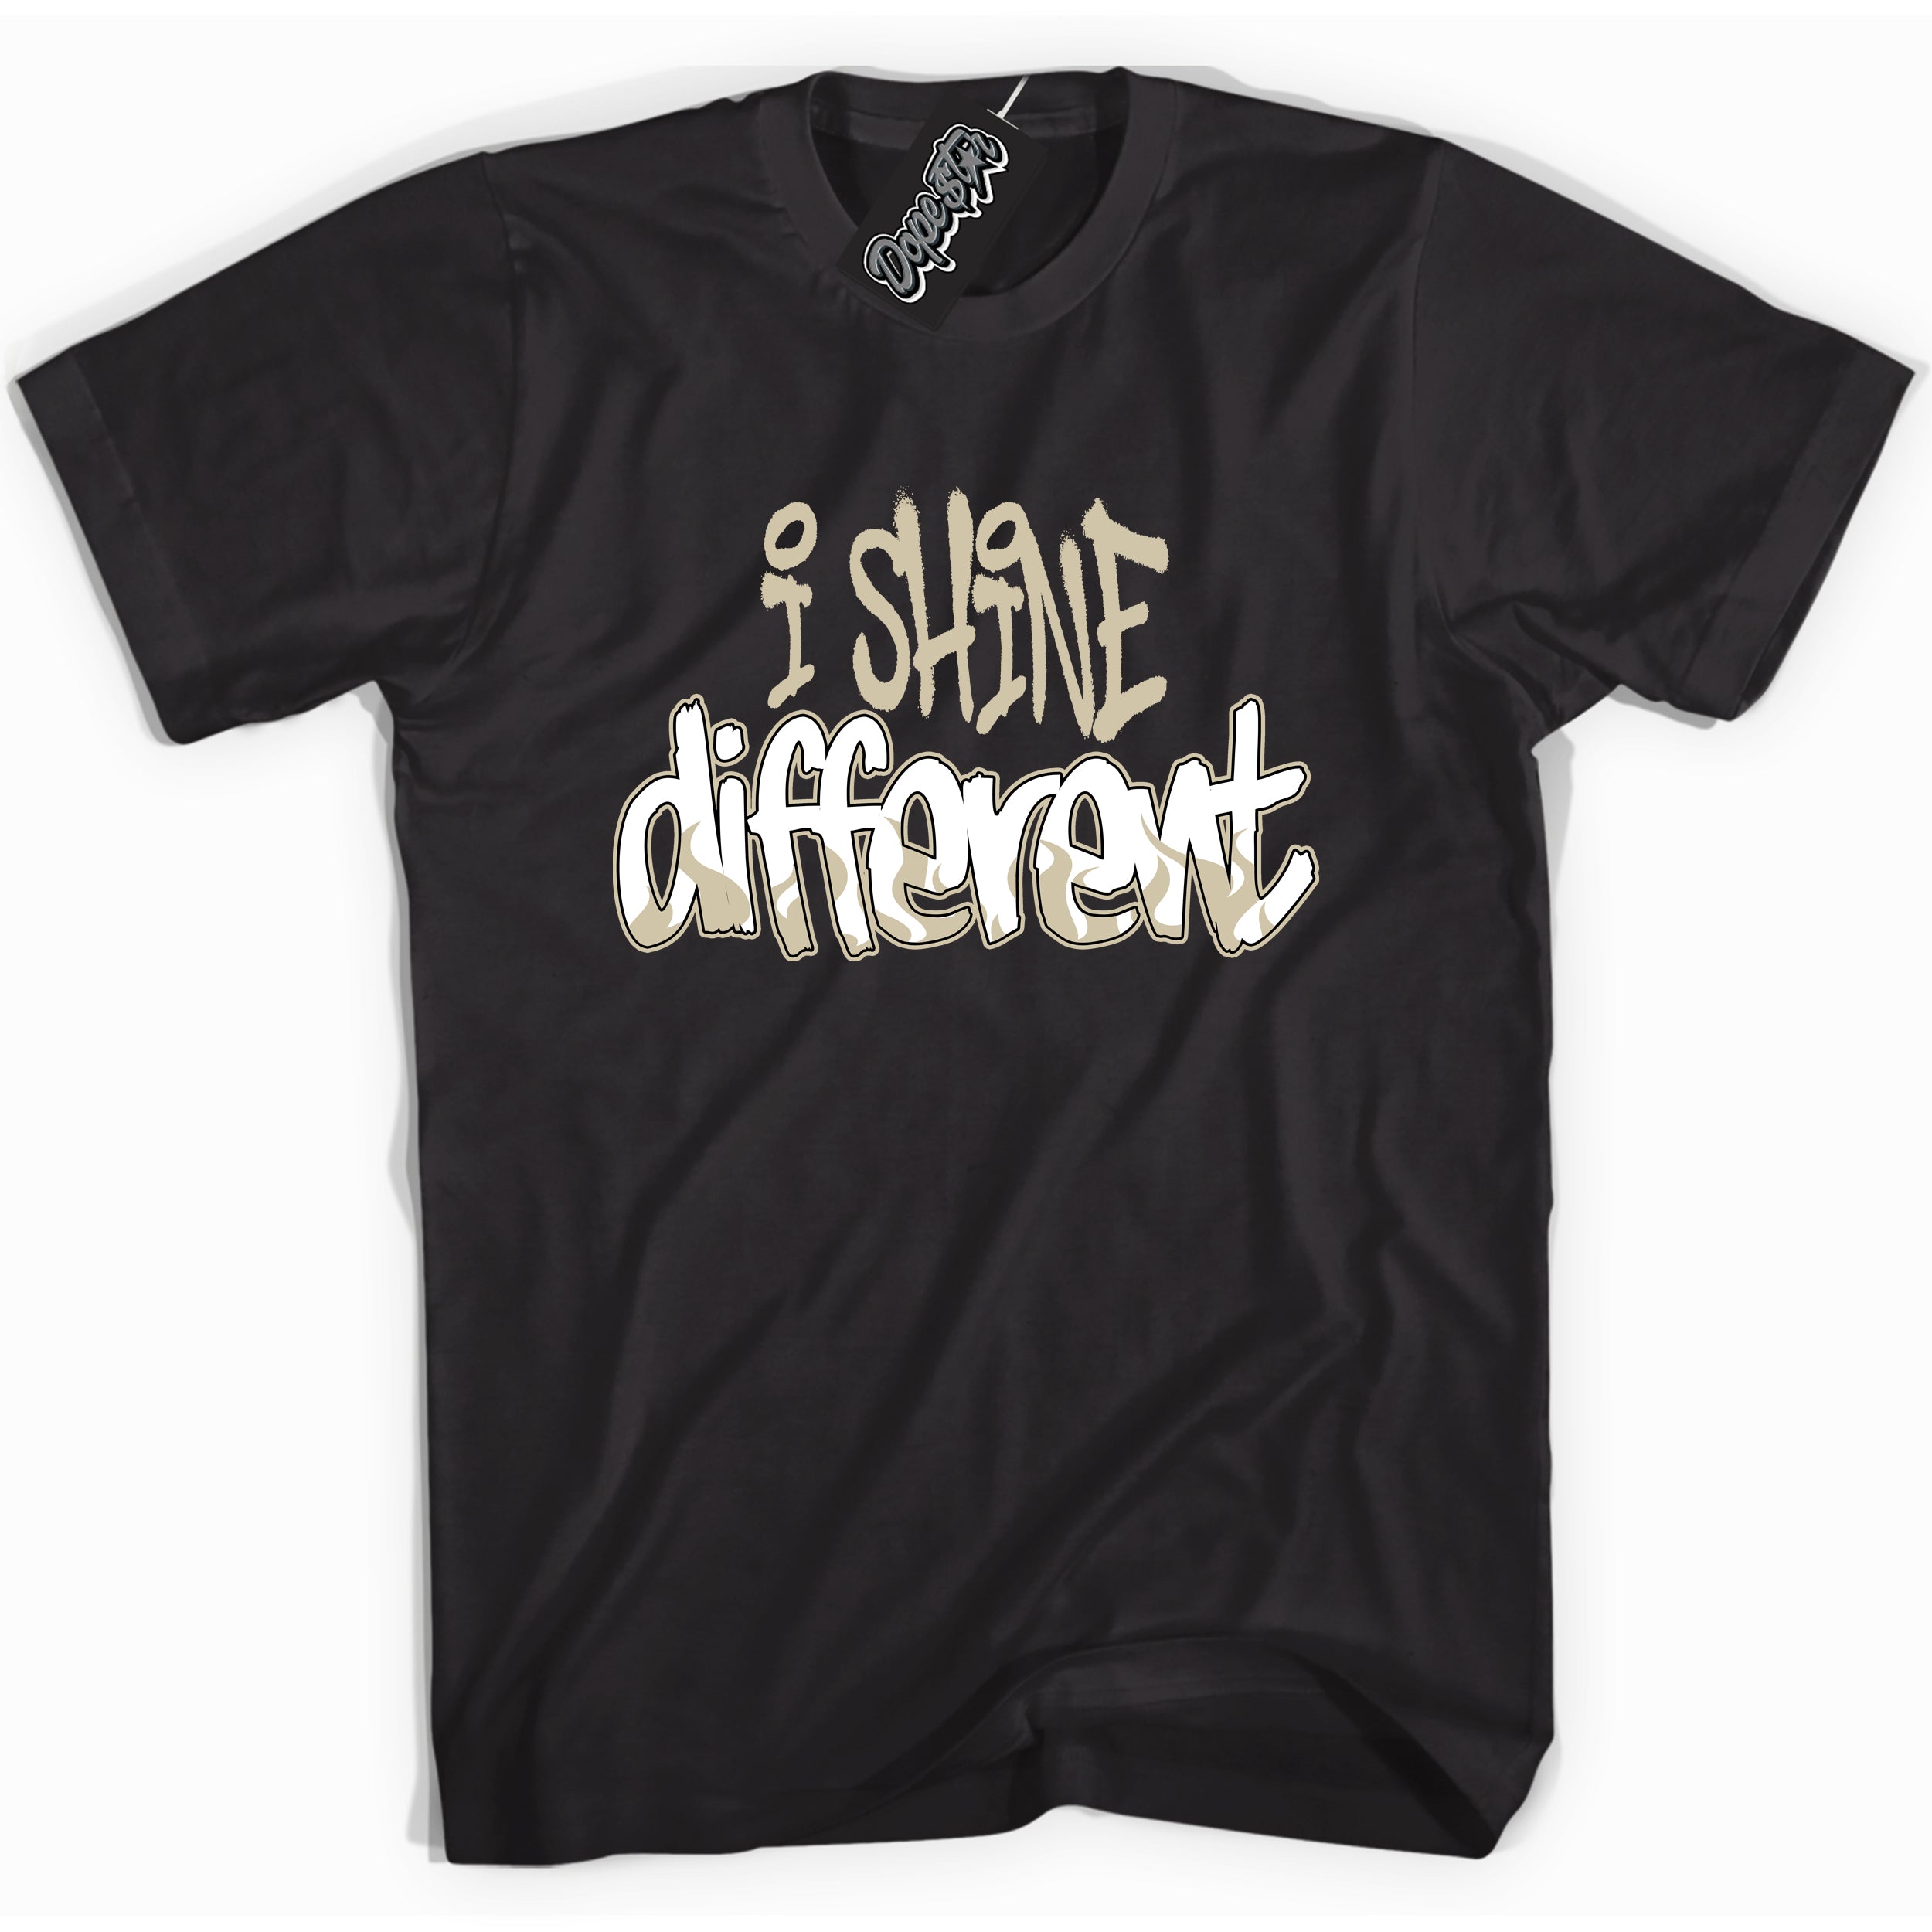 Cool Black graphic tee with “ I Shine Different ” print, that perfectly matches GRATITUDE 11s  sneaker